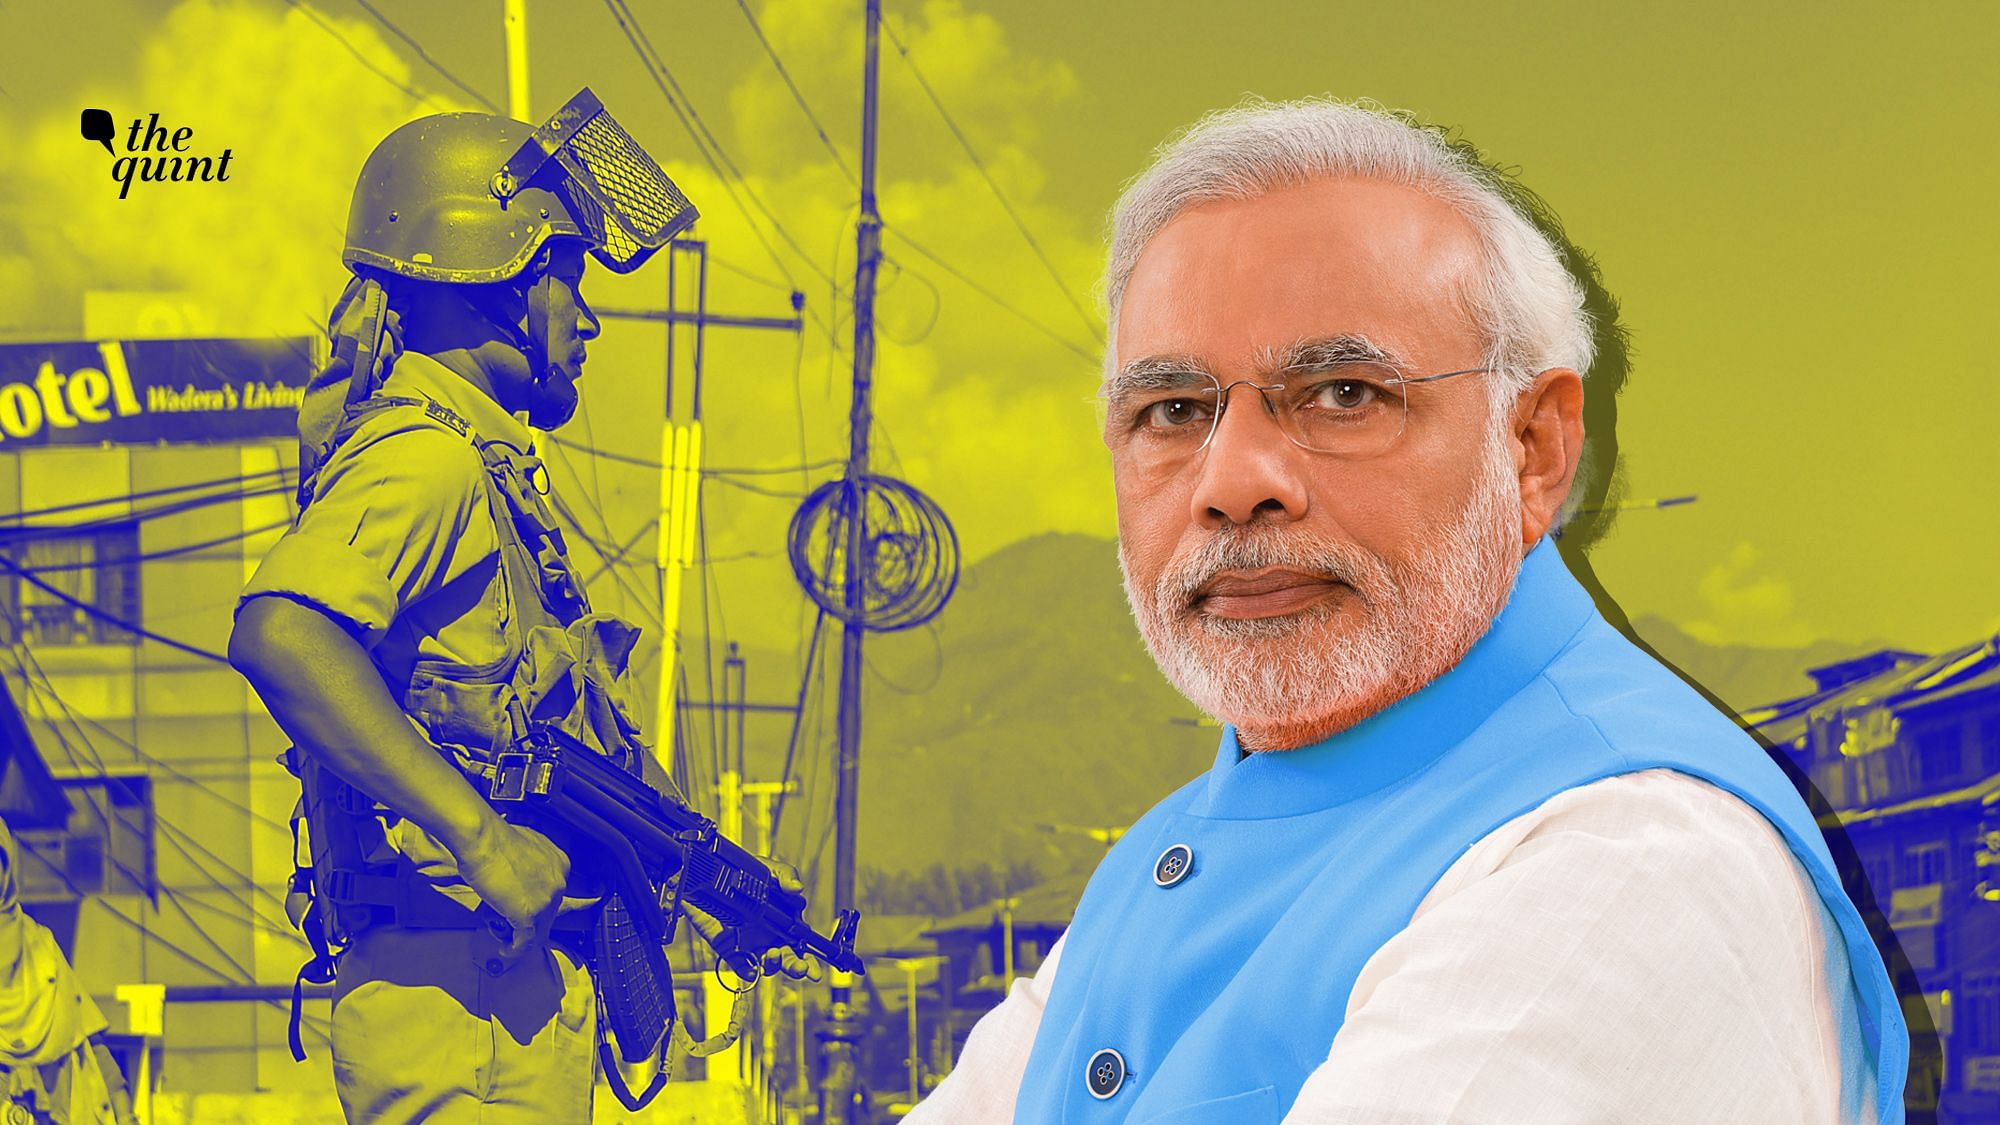 Image of PM Modi and a background picture of Kashmir used for representational purposes.